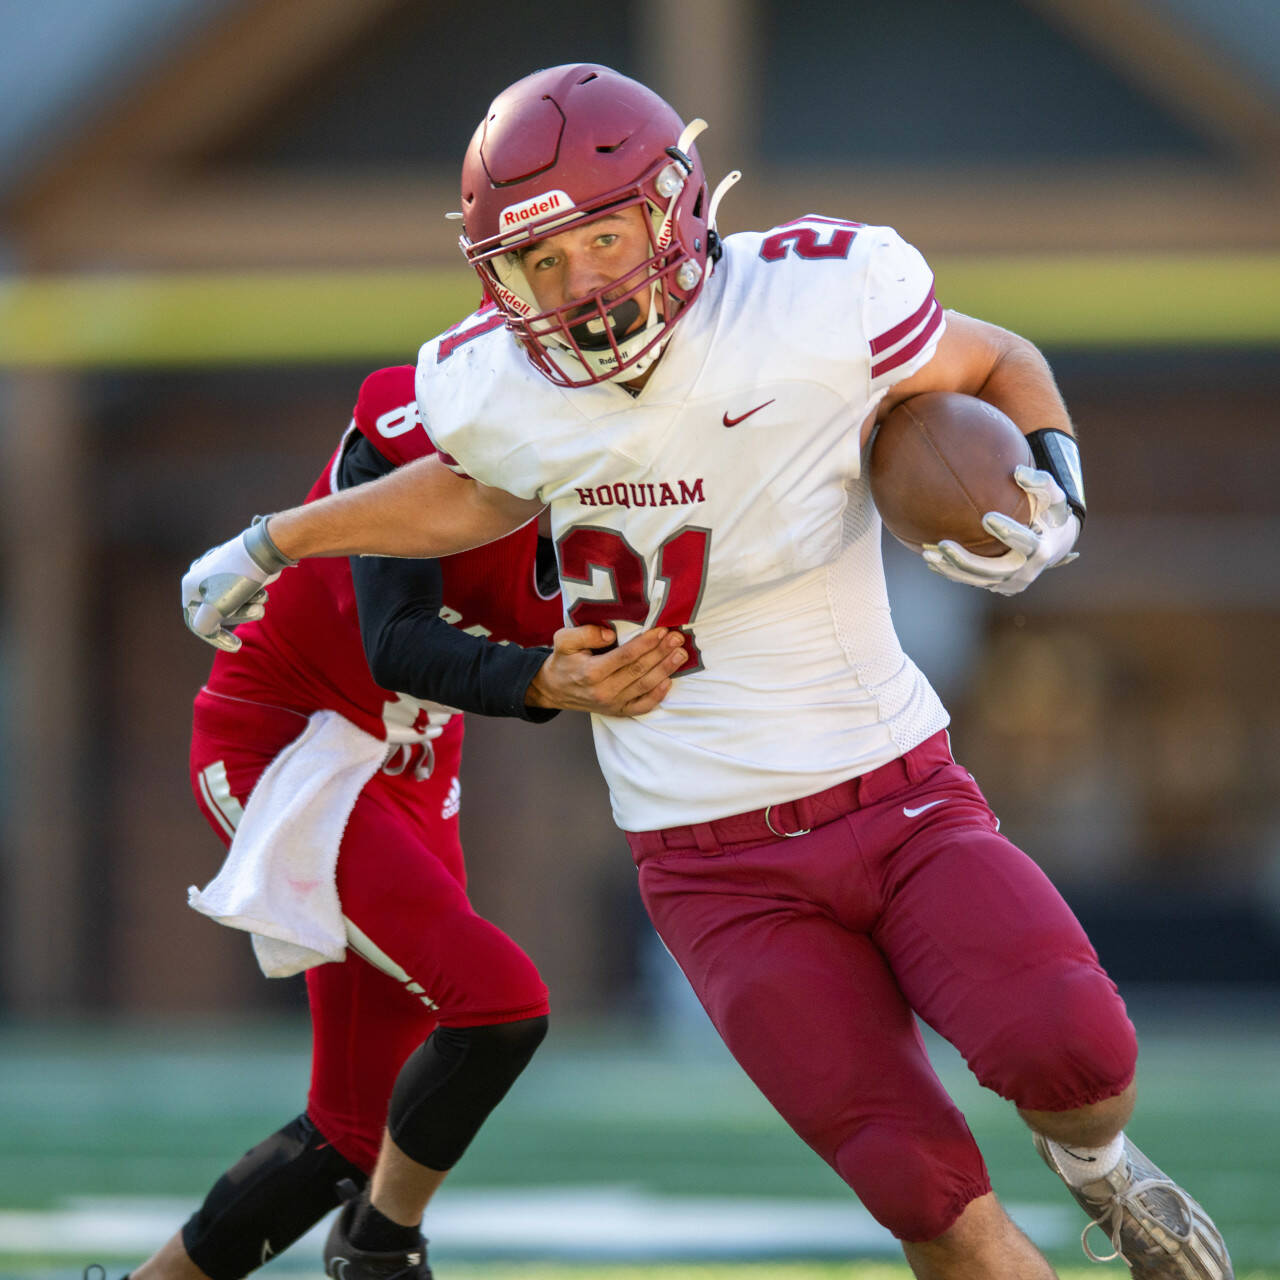 PHOTO BY FOREST WORGUM Hoquiam running back Dominic Standstipher (21) rushed for over 100 yards and a touchdown in a 50-20 victory over Fort Vancouver on Friday in Vancouver.